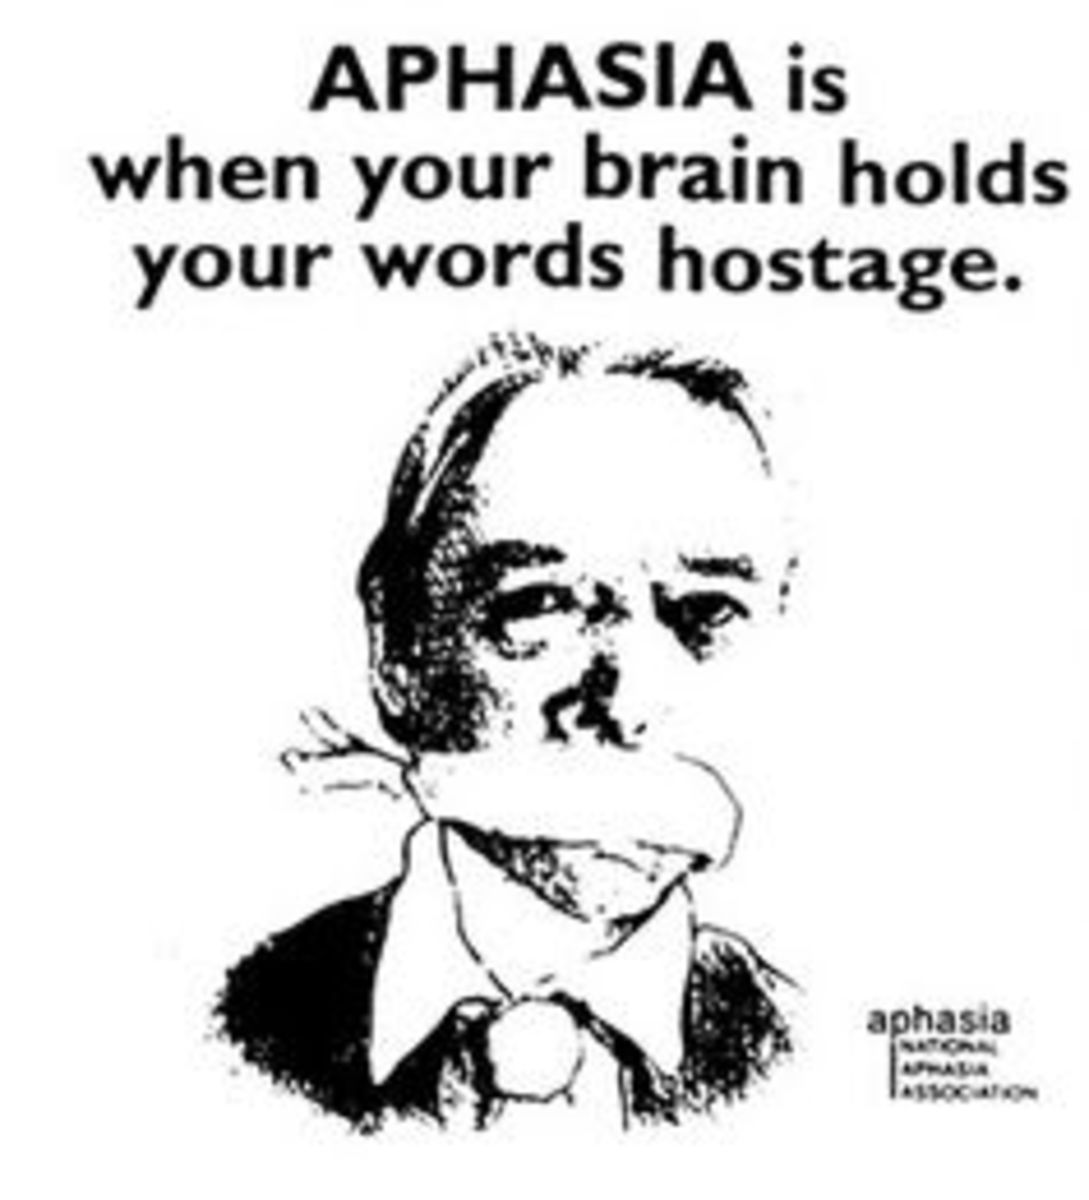 At a Loss for Words: Aphasia